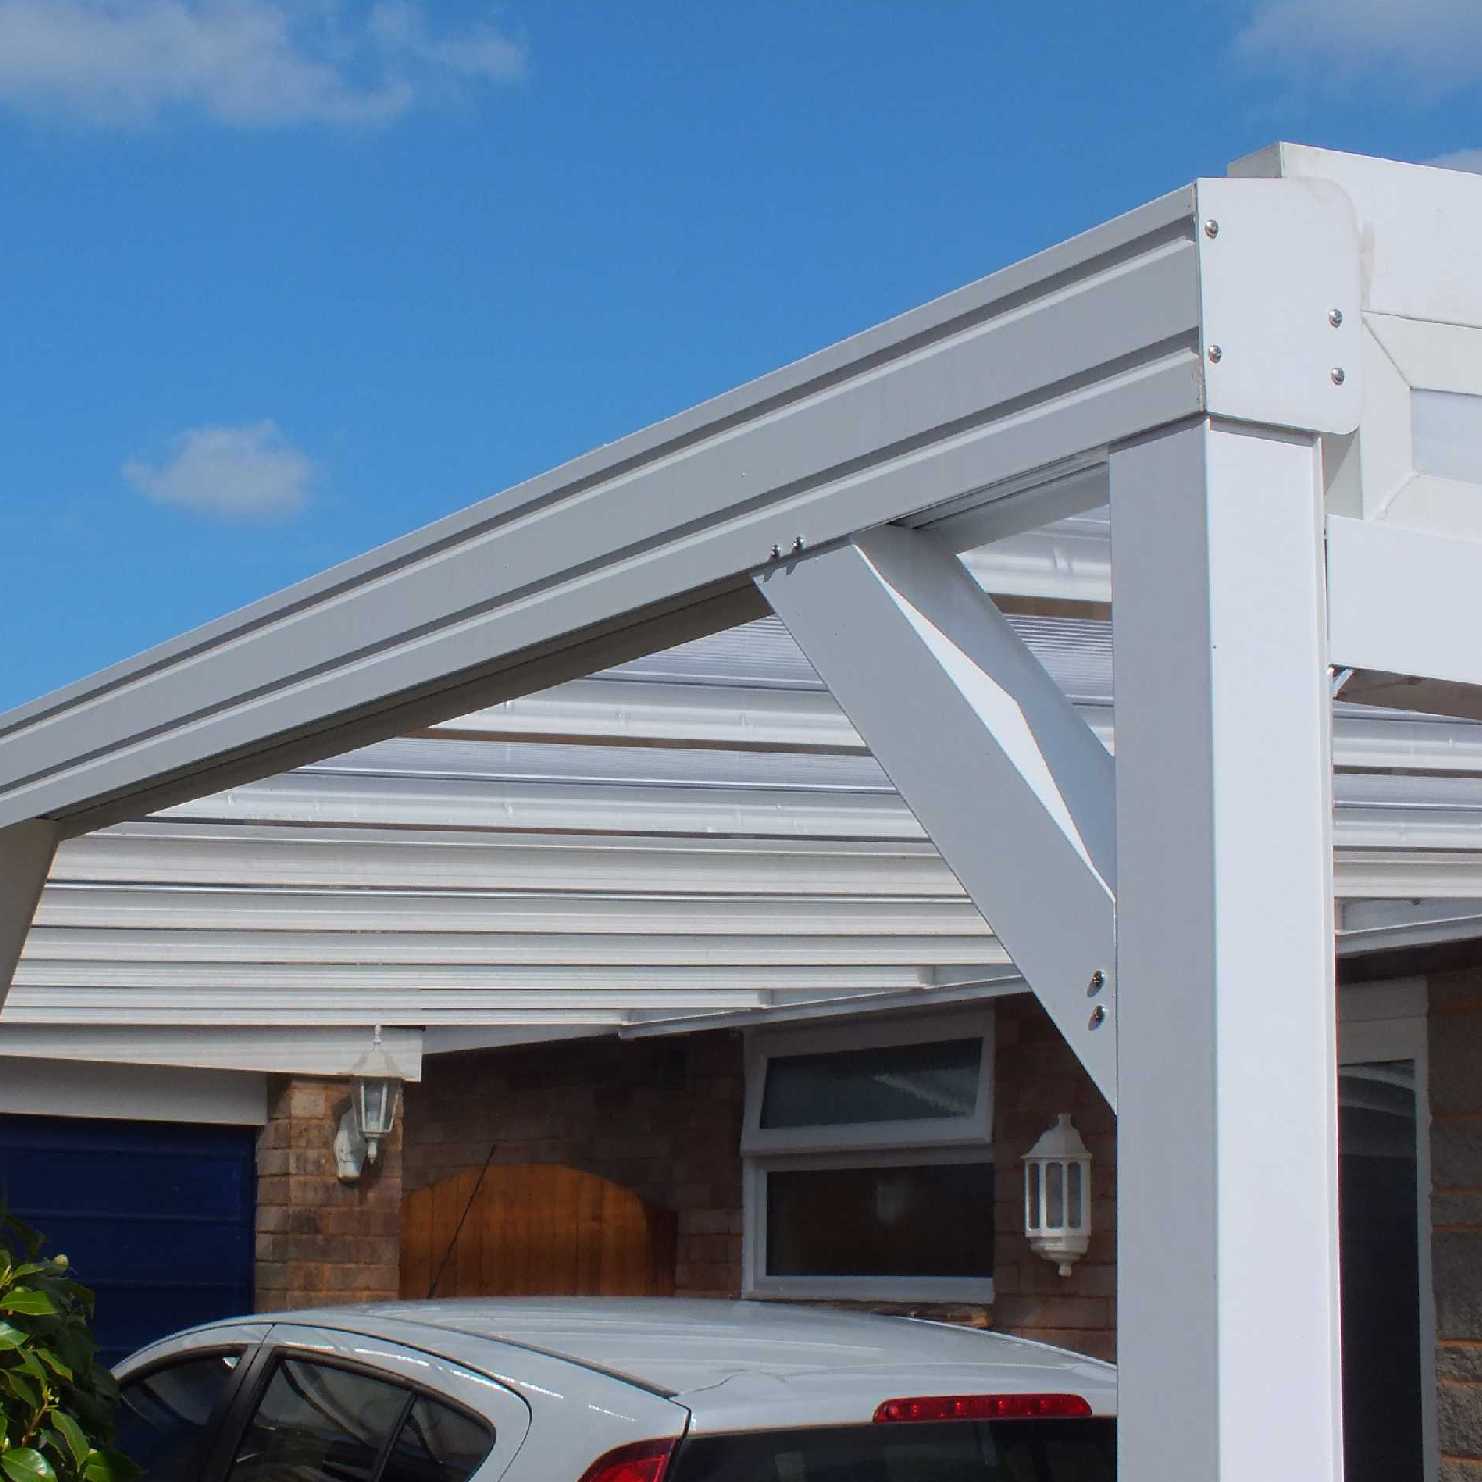 Buy Omega Smart Lean-To Canopy, White with 16mm Polycarbonate Glazing - 6.0m (W) x 1.5m (P), (3) Supporting Posts online today